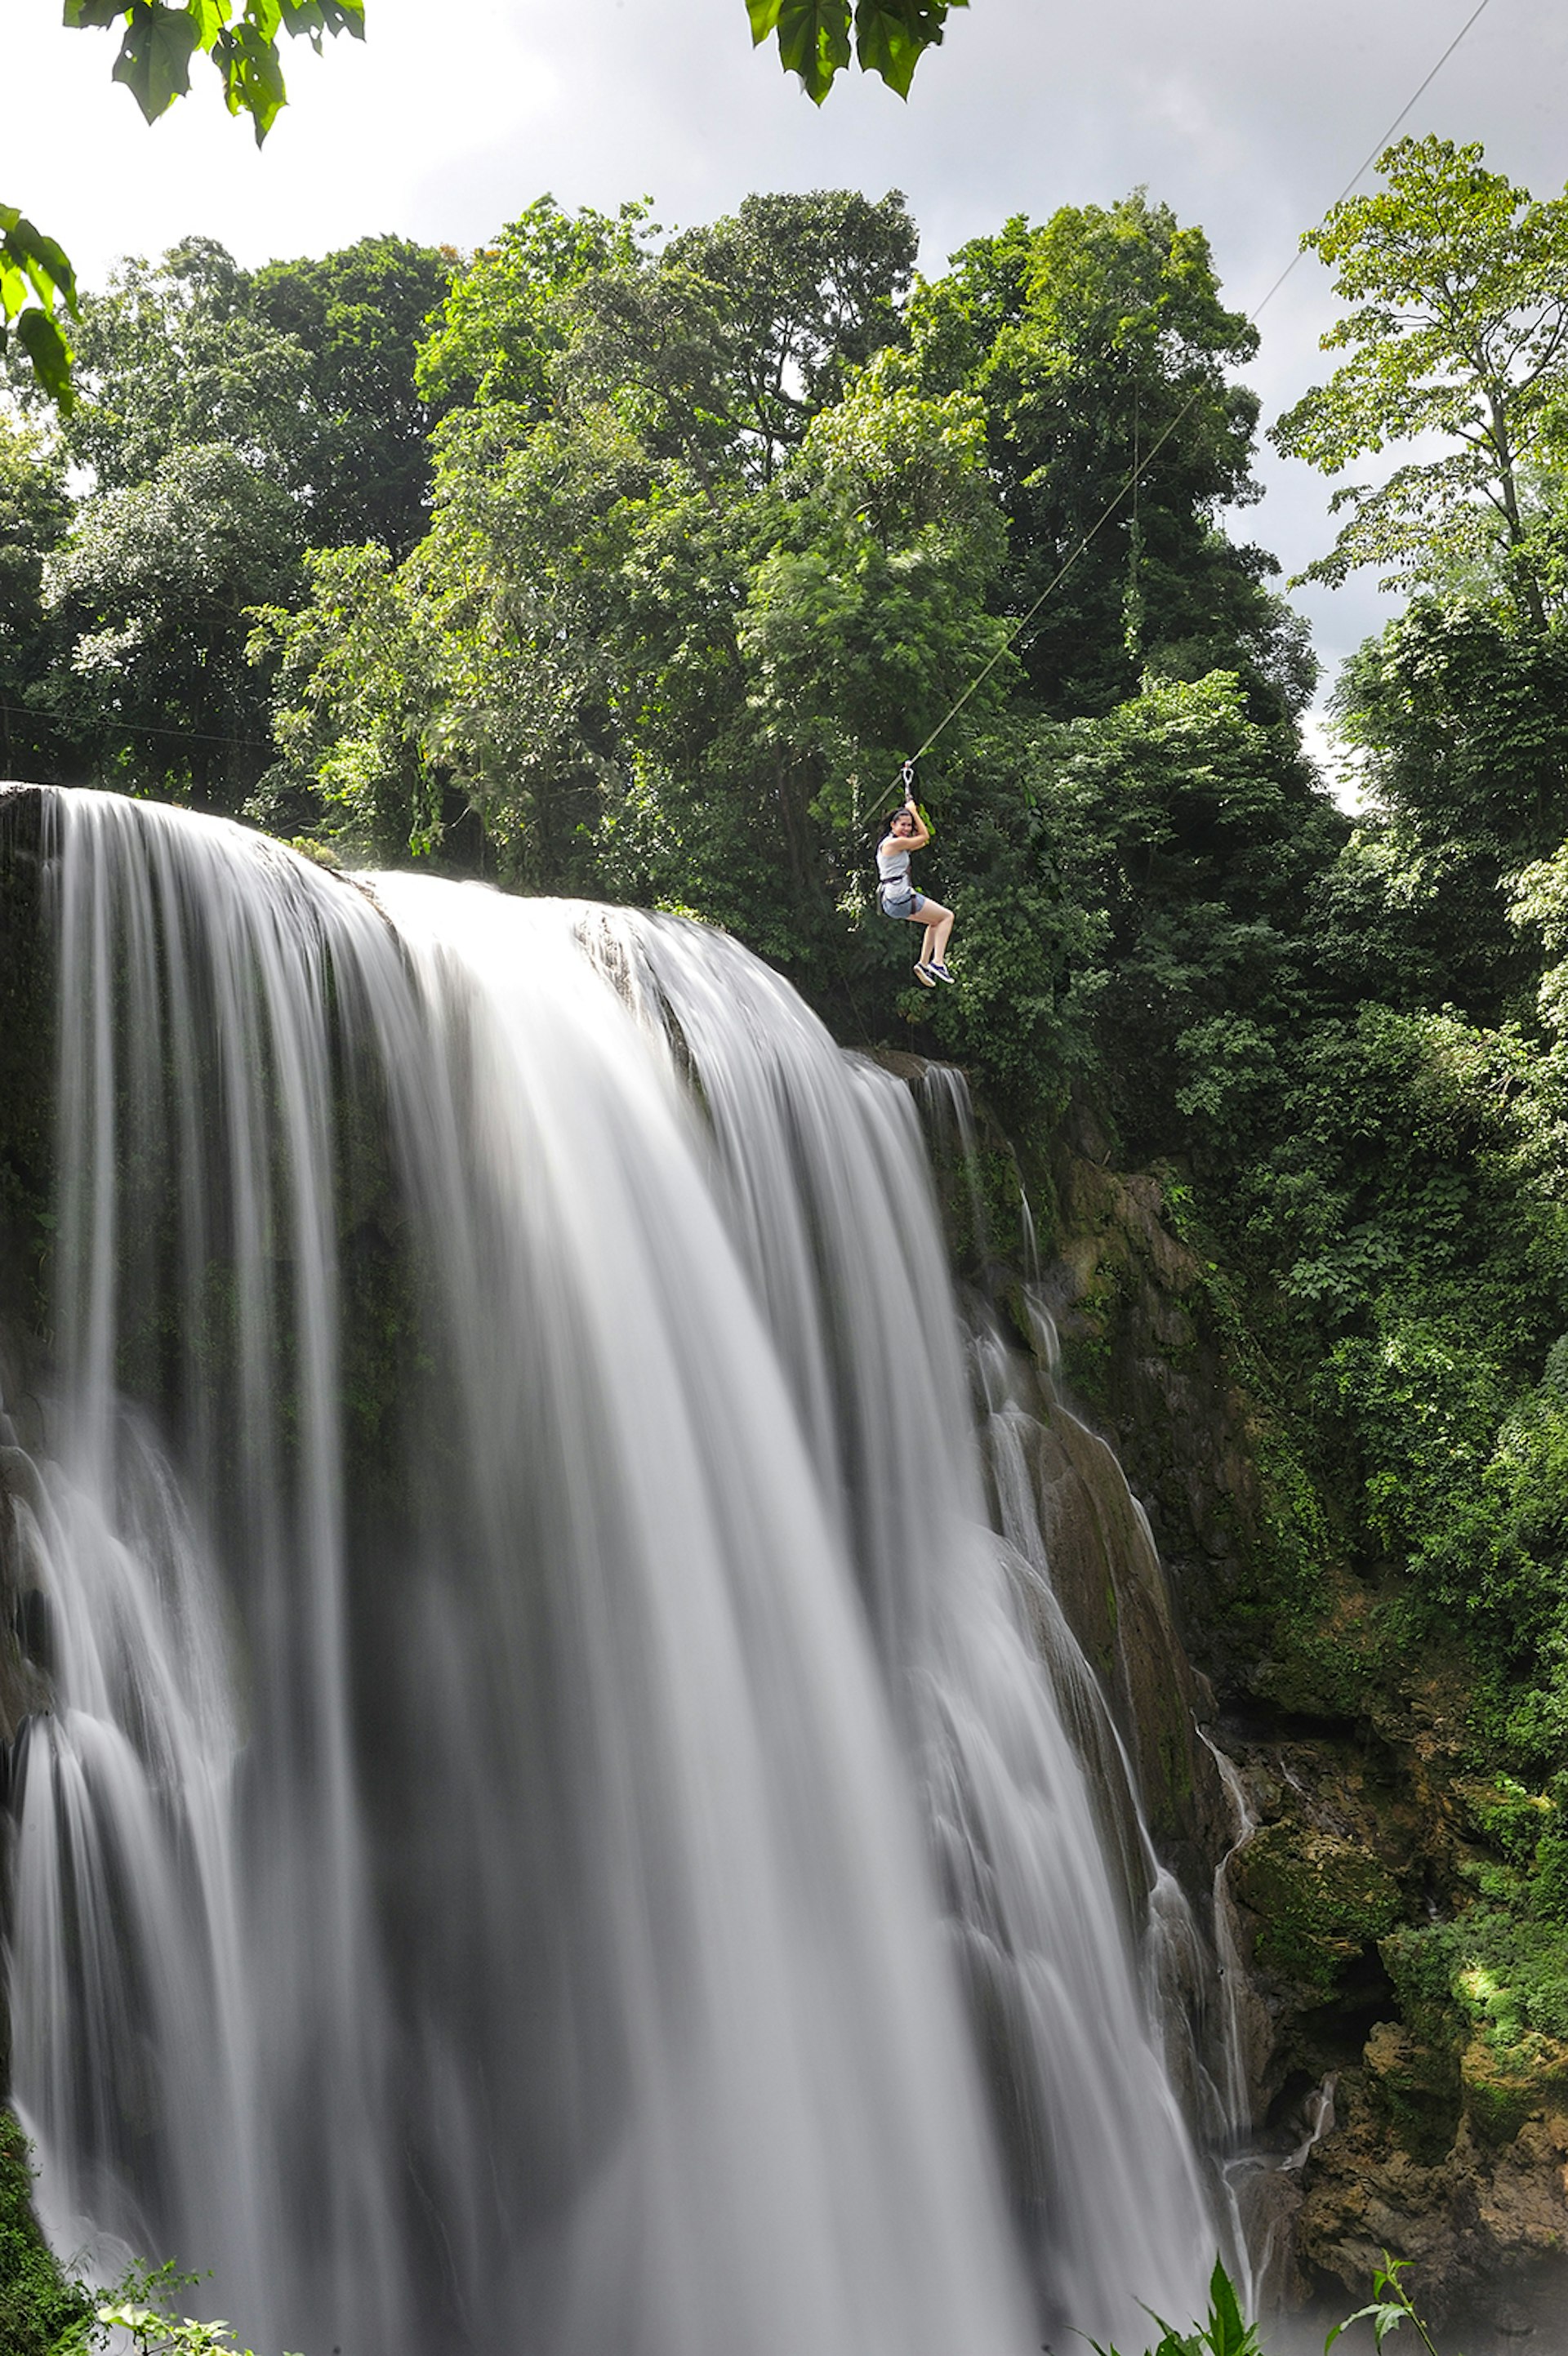 A visitor on zip line over Pulhapanzak Waterfalls © Christian Heeb / Getty Images